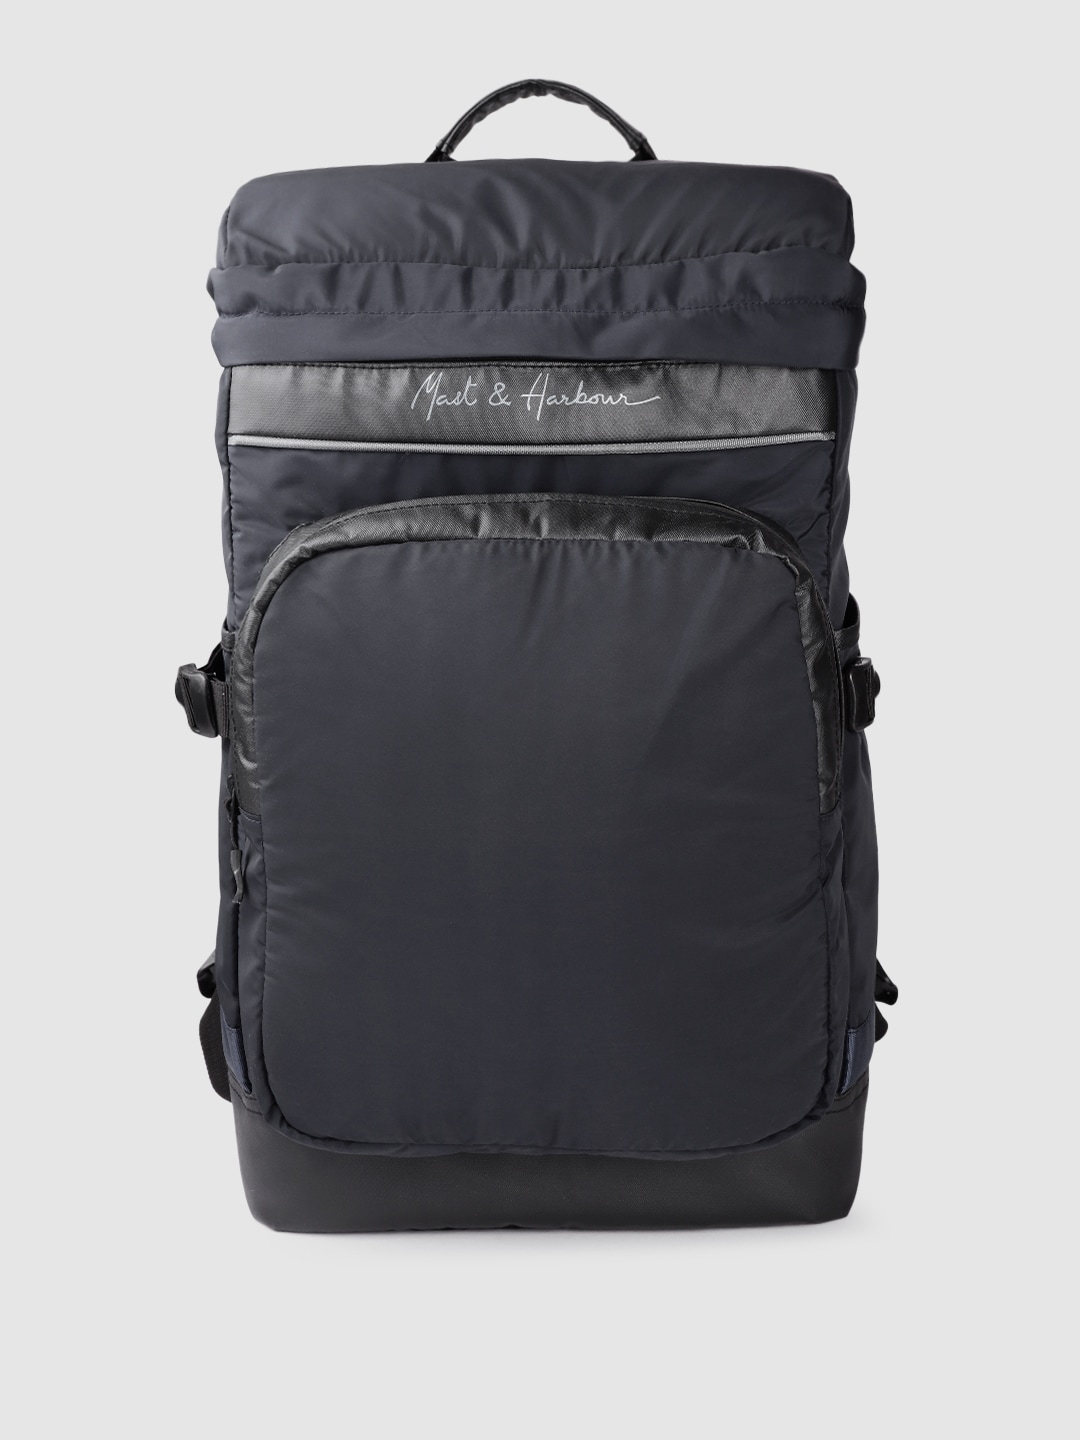 Mast & Harbour Unisex Navy Blue Solid Backpack 20.8 L Price in India